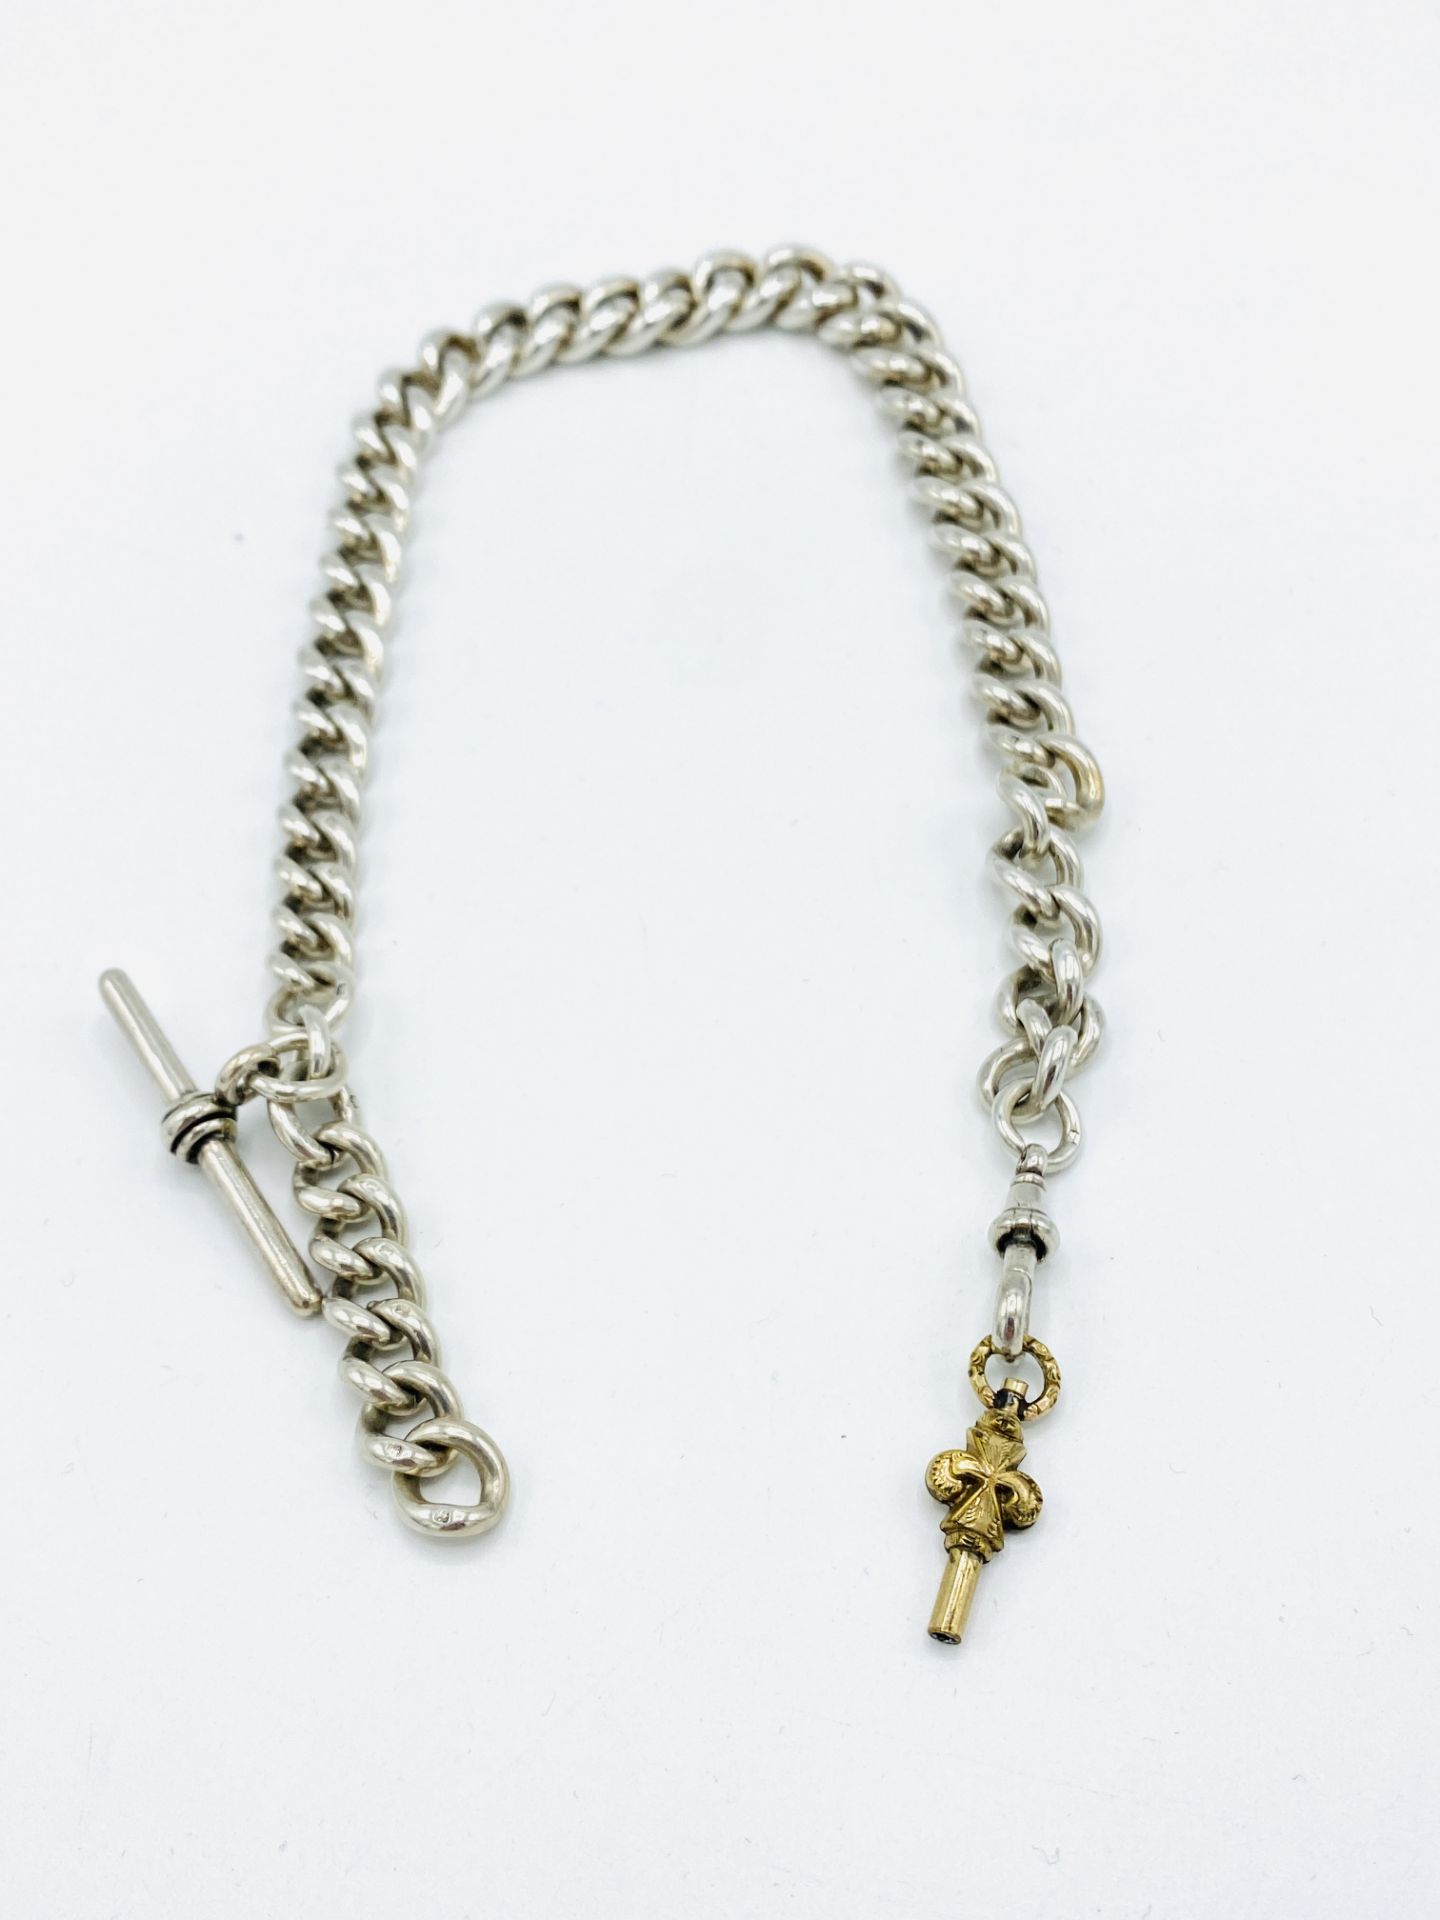 Silver fob chain - Image 3 of 6